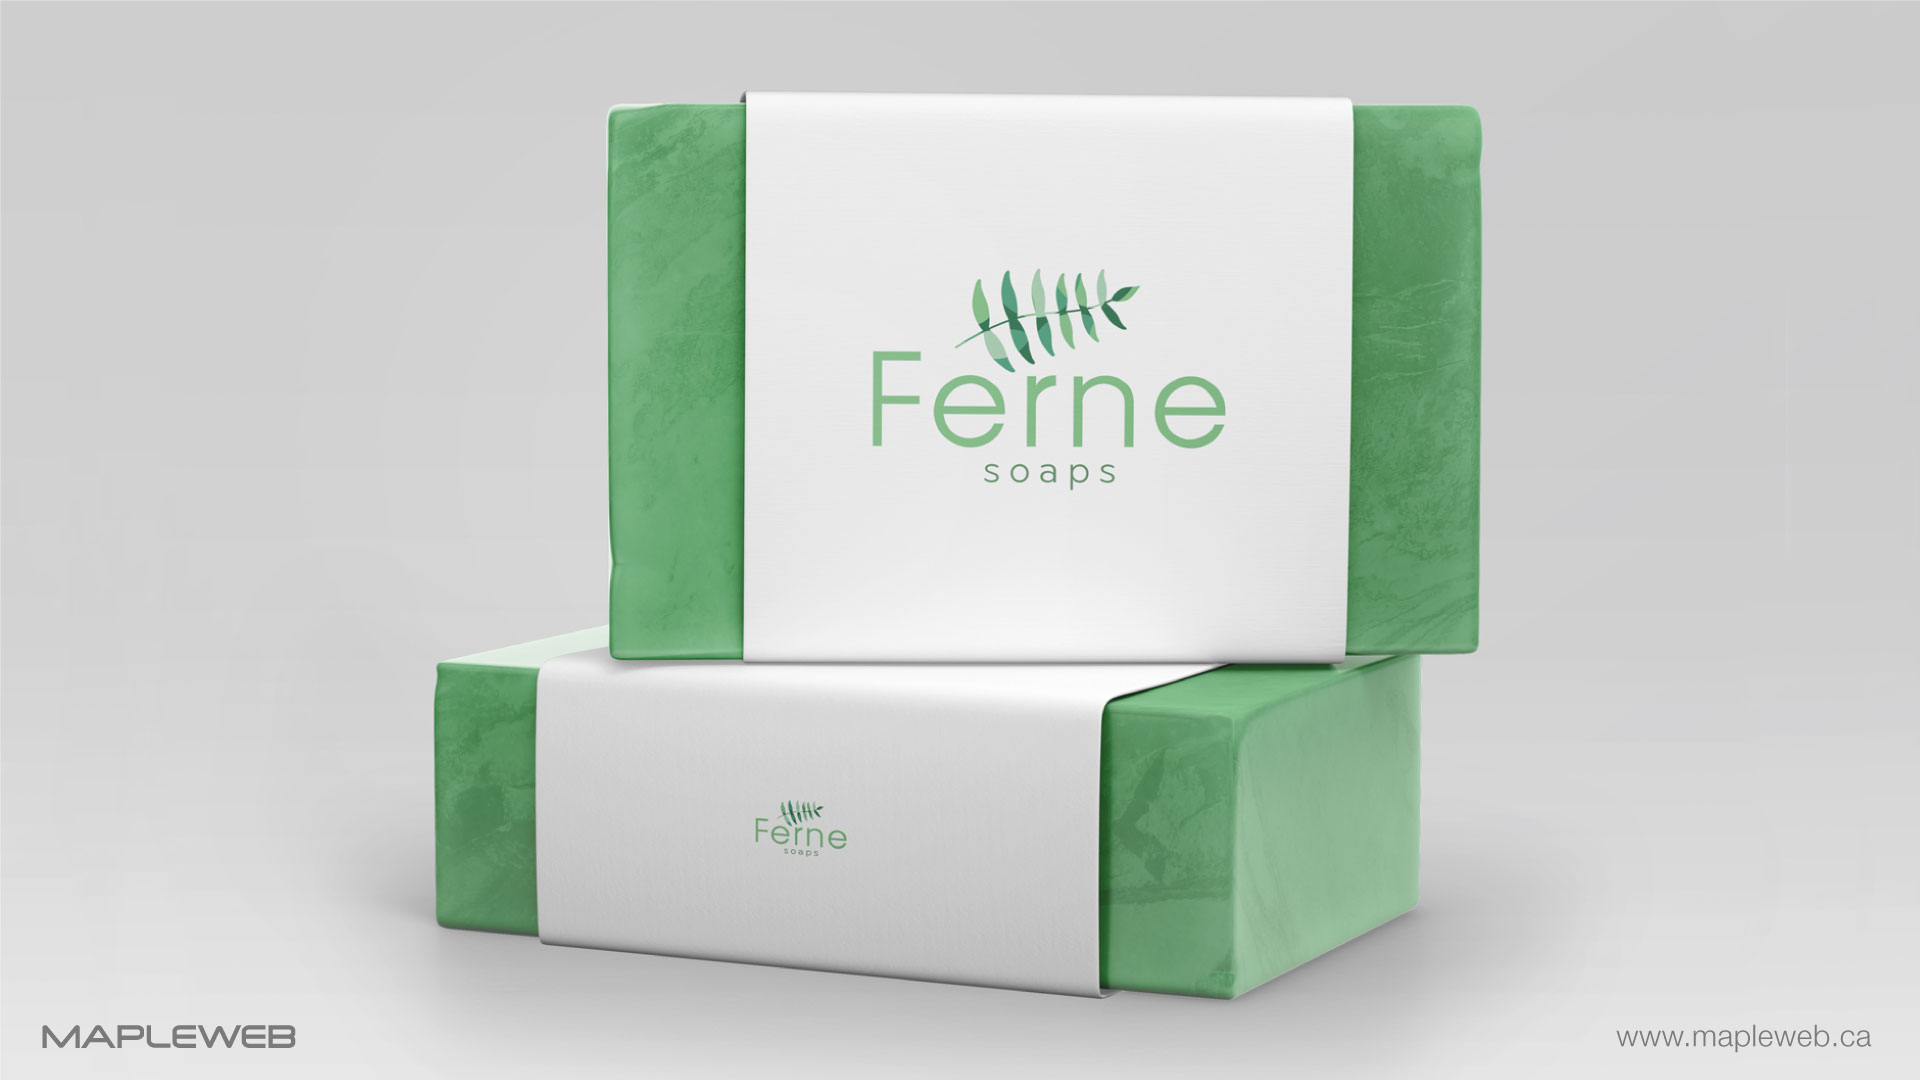 ferne-soap-brand-logo-design-by-mapleweb-vancouver-canada-two-soap-packaging-mock